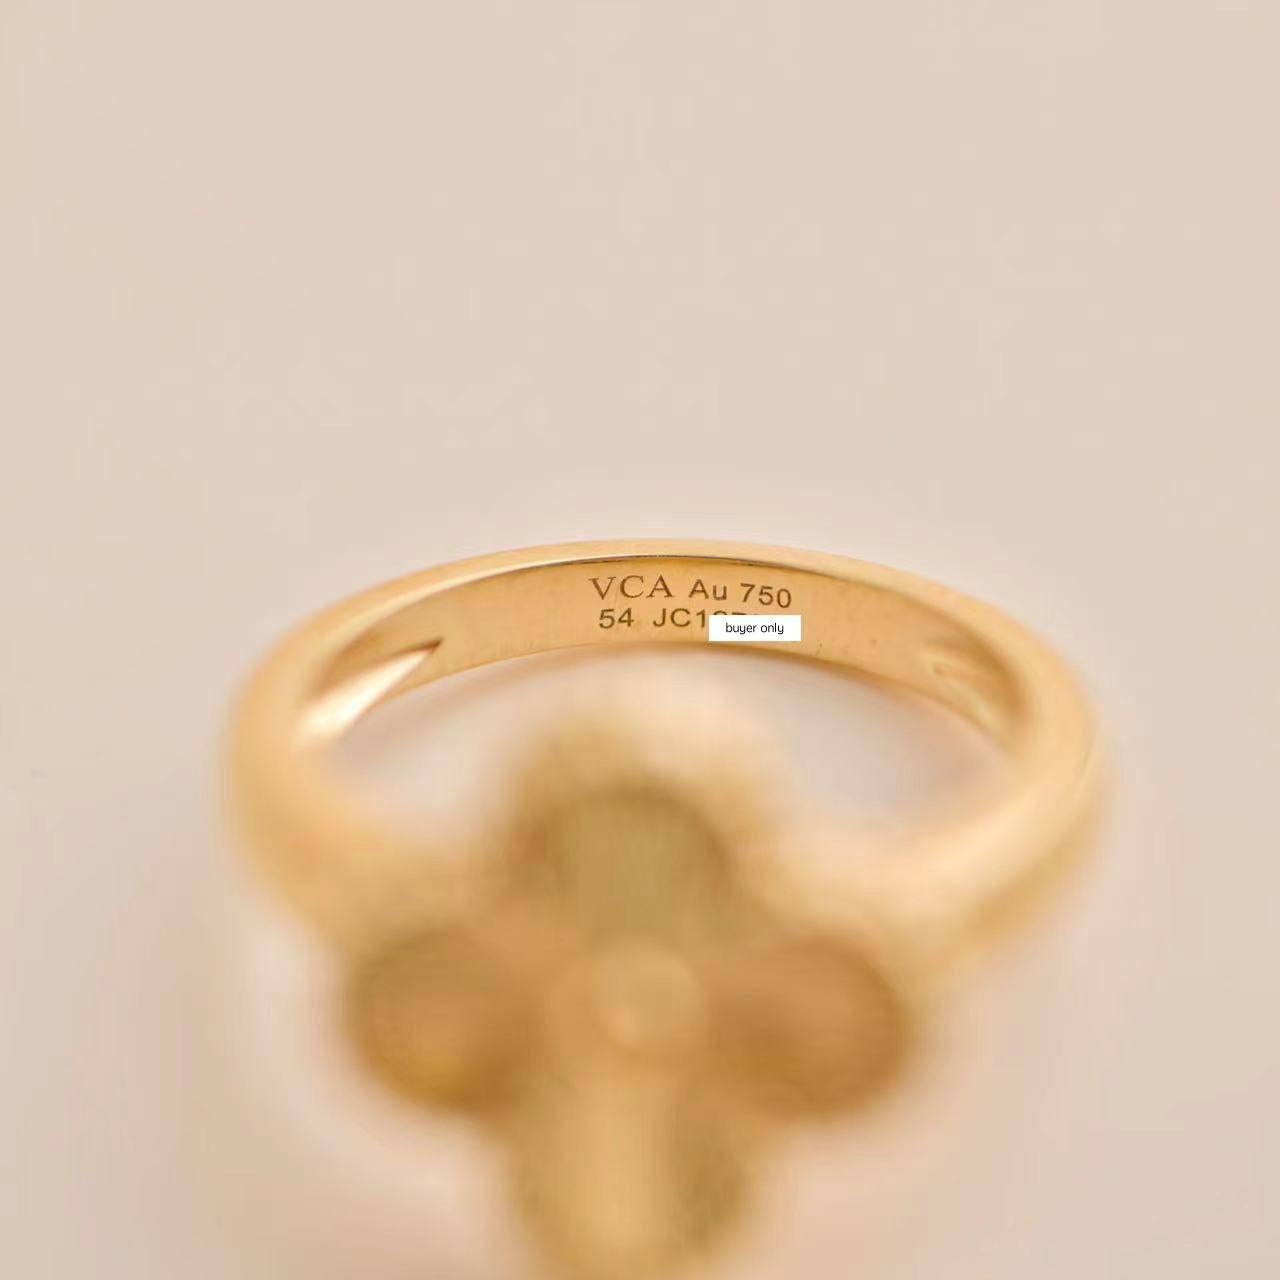 Van Cleef & Arpels Guilloché Alhambra 18k Yellow Gold Ring Size 54 For Sale 3